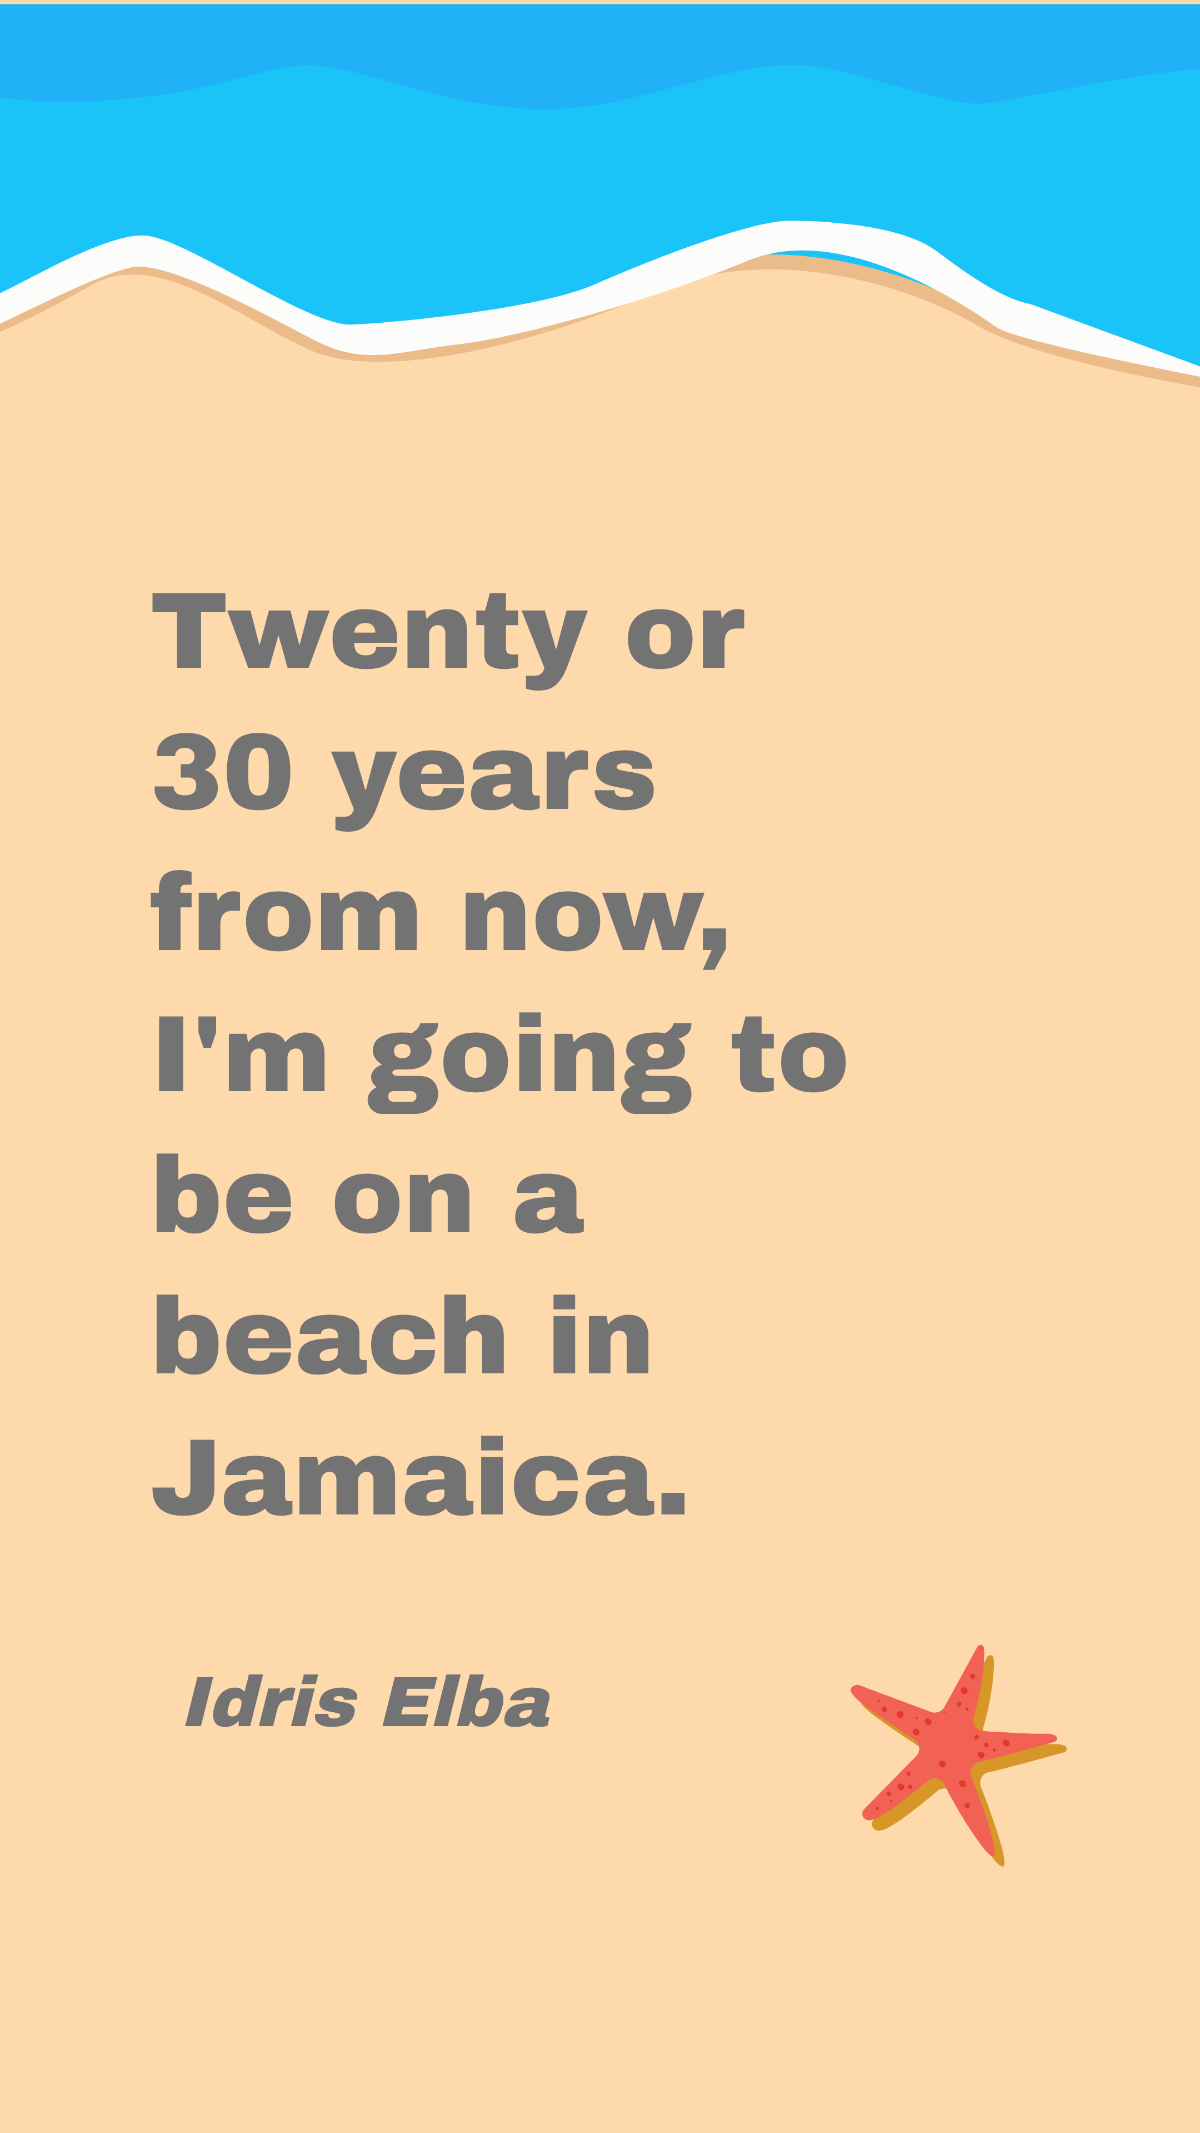 Free Idris Elba - Twenty or 30 years from now, I'm going to be on a beach in Jamaica. Template